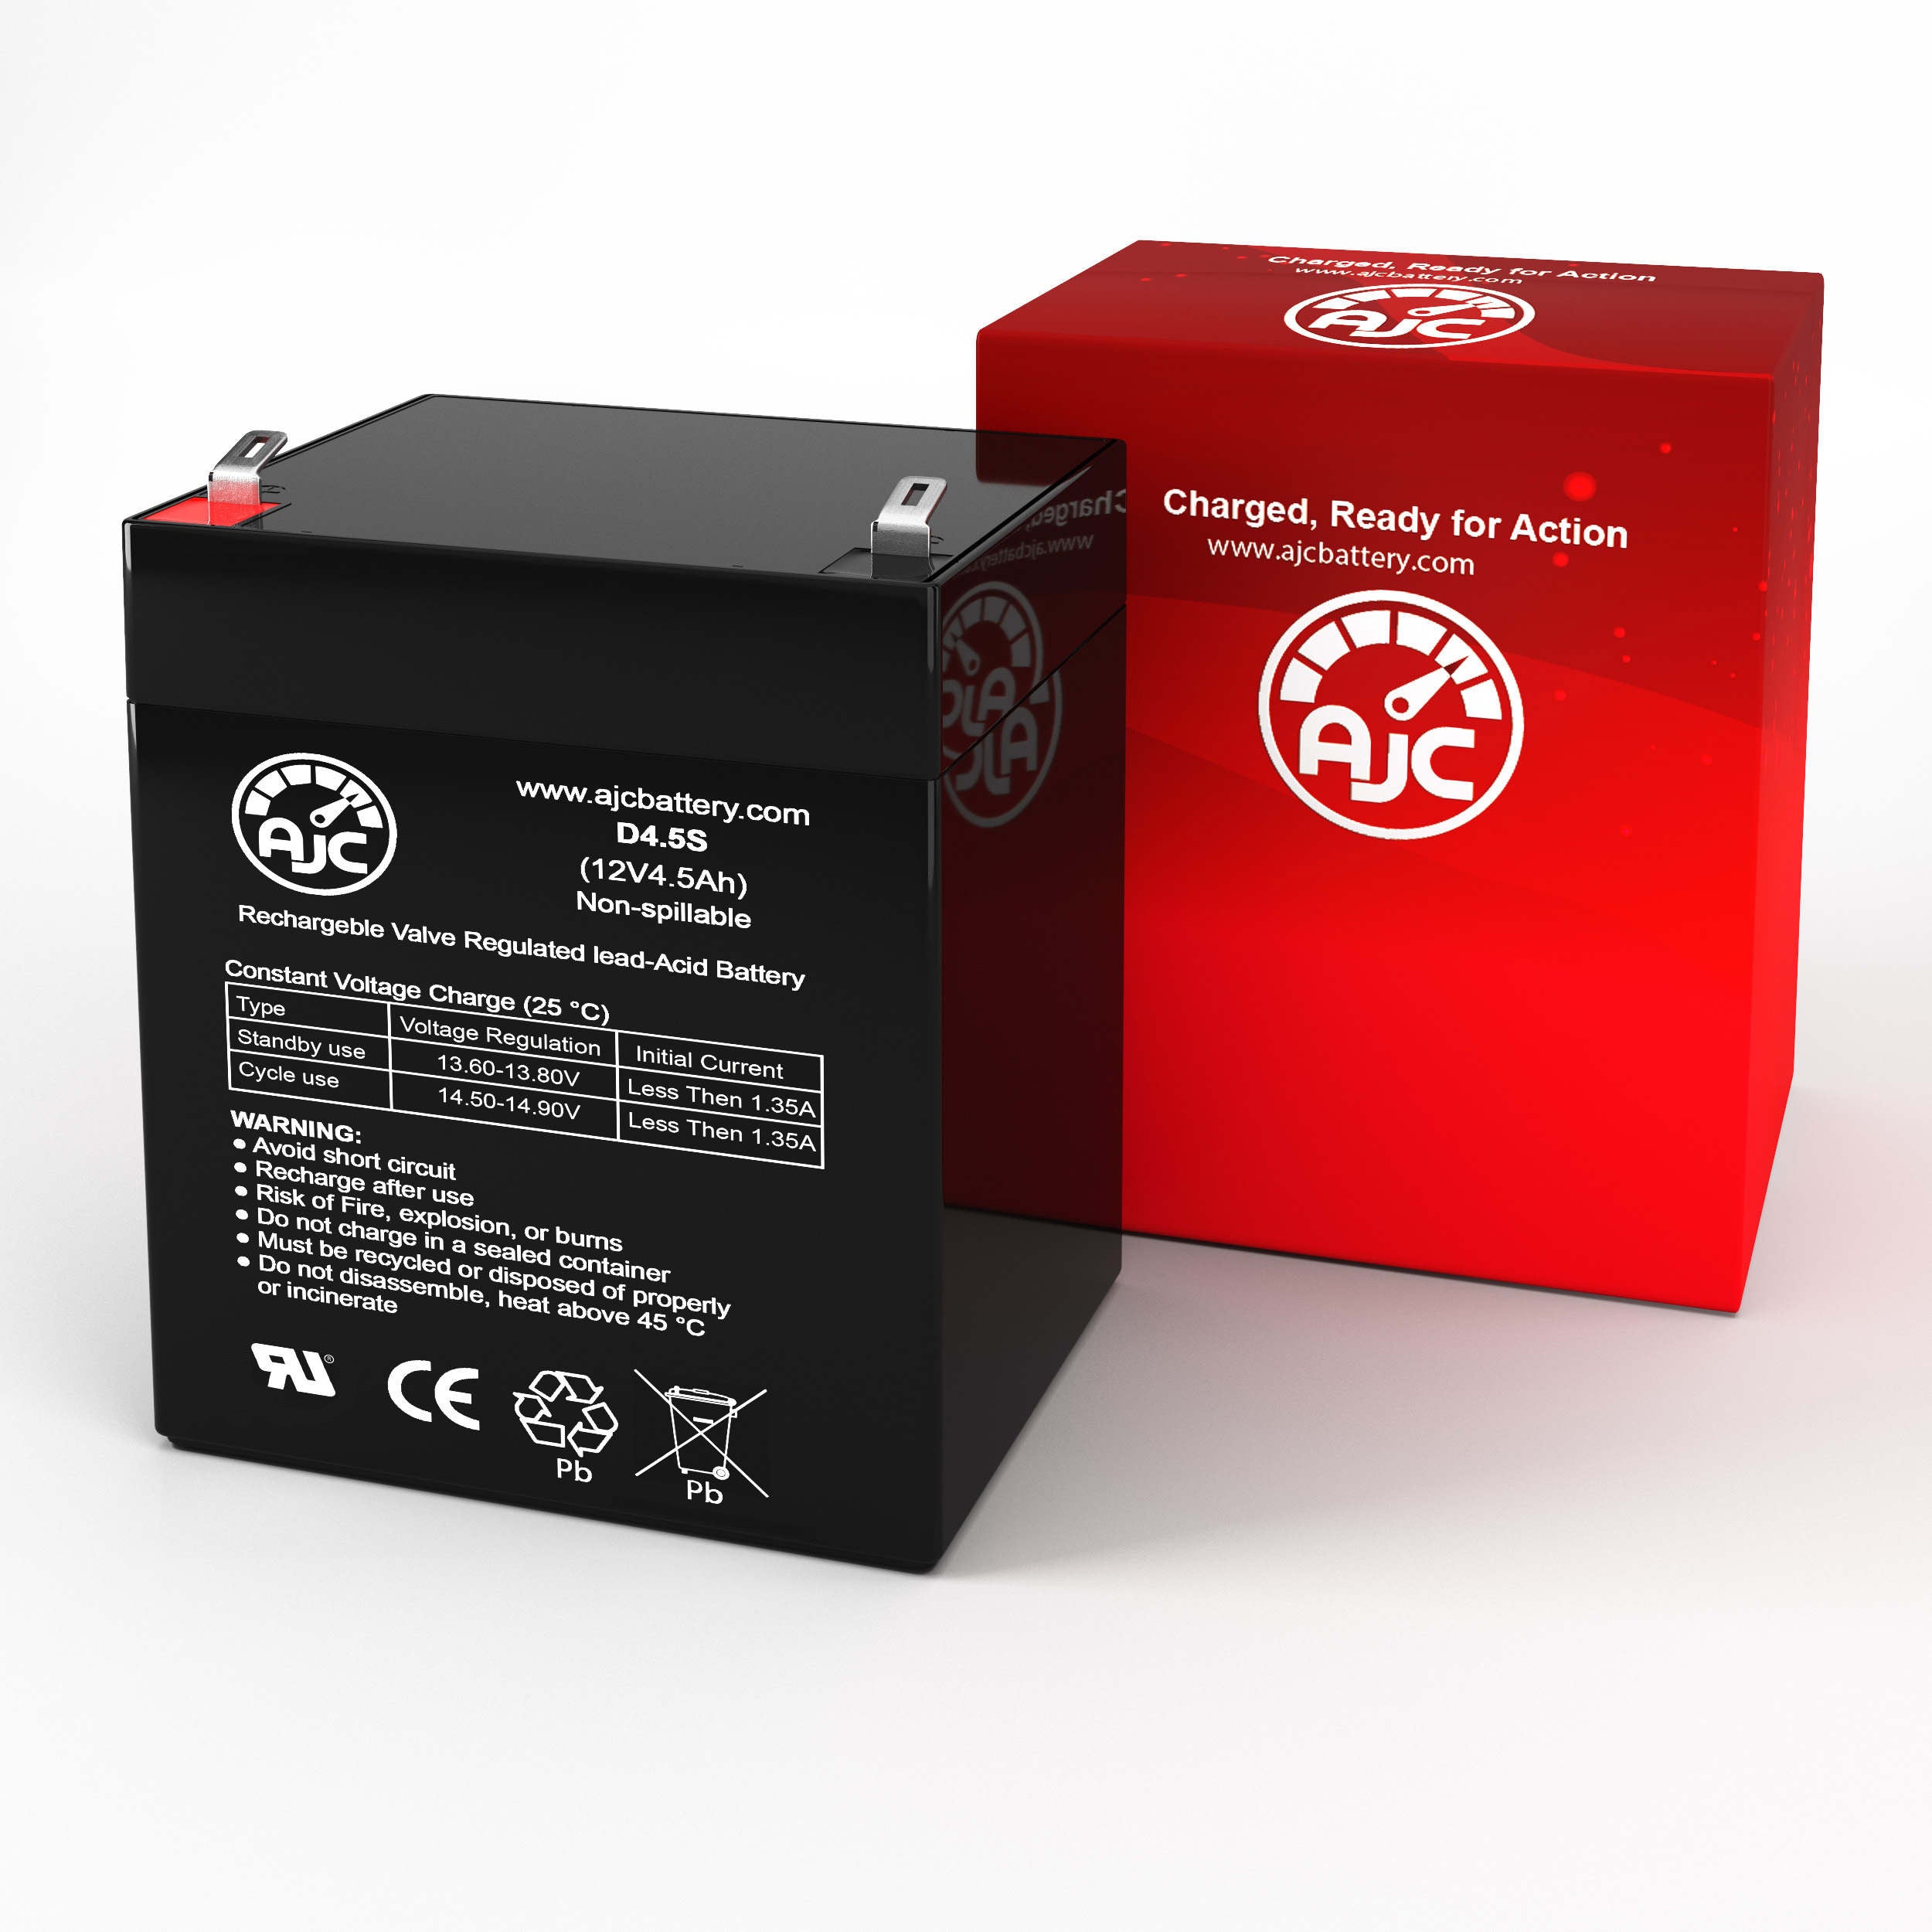 Universal Power Group UB1250 Replaces 4Ah 12V 4.5Ah Mobility Scooter Battery - This Is an AJC Brand Replacement - image 2 of 6